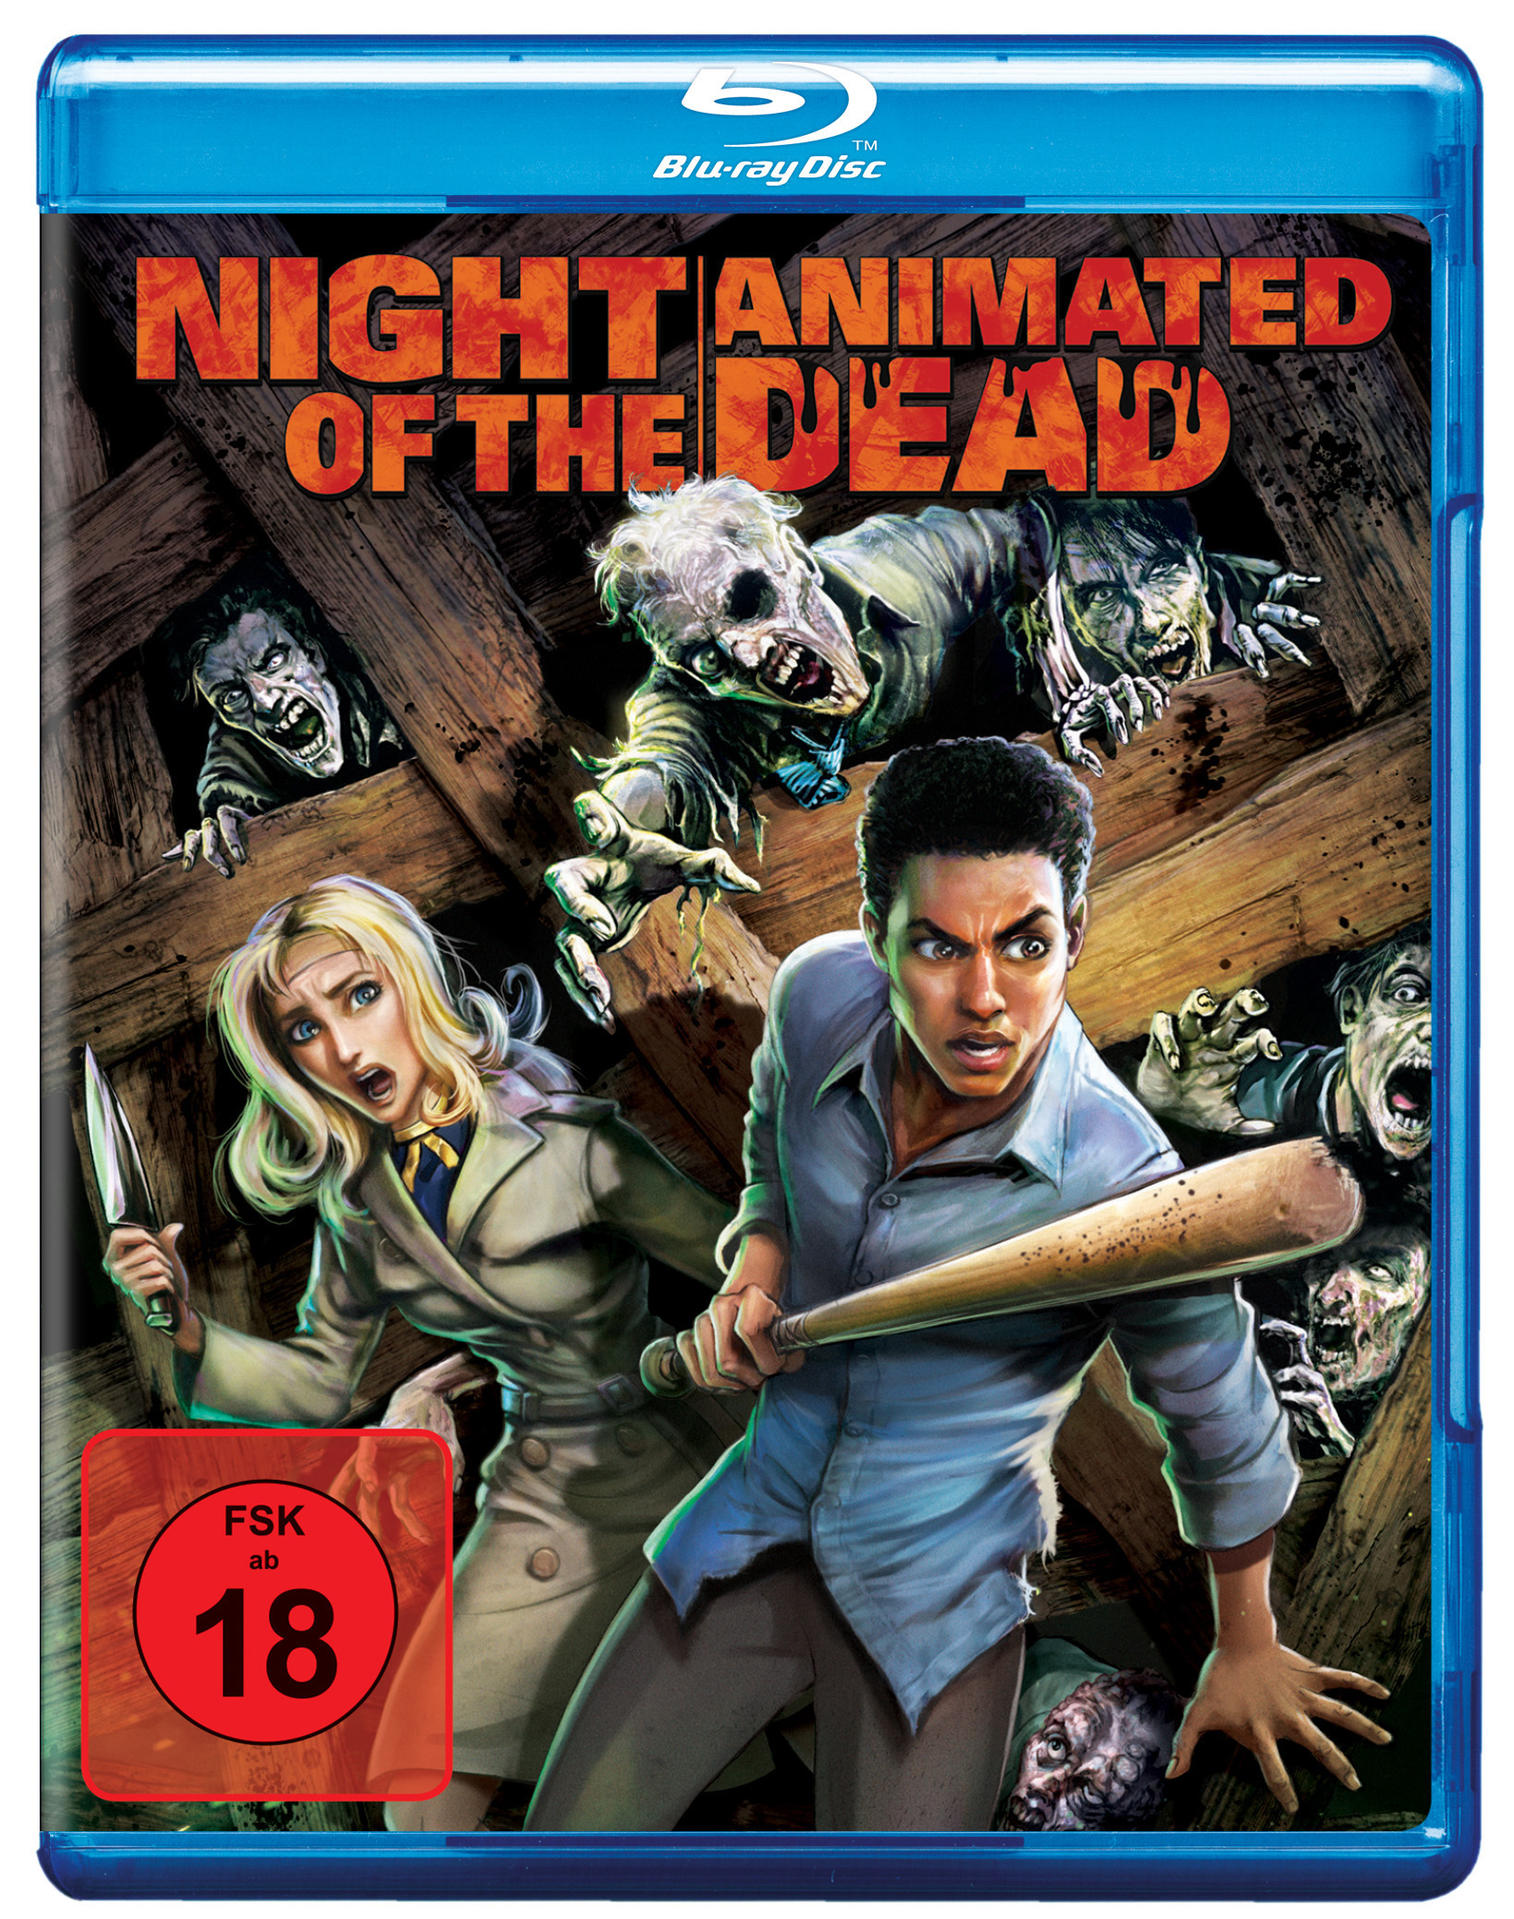 Animated Night of Blu-ray the Dead